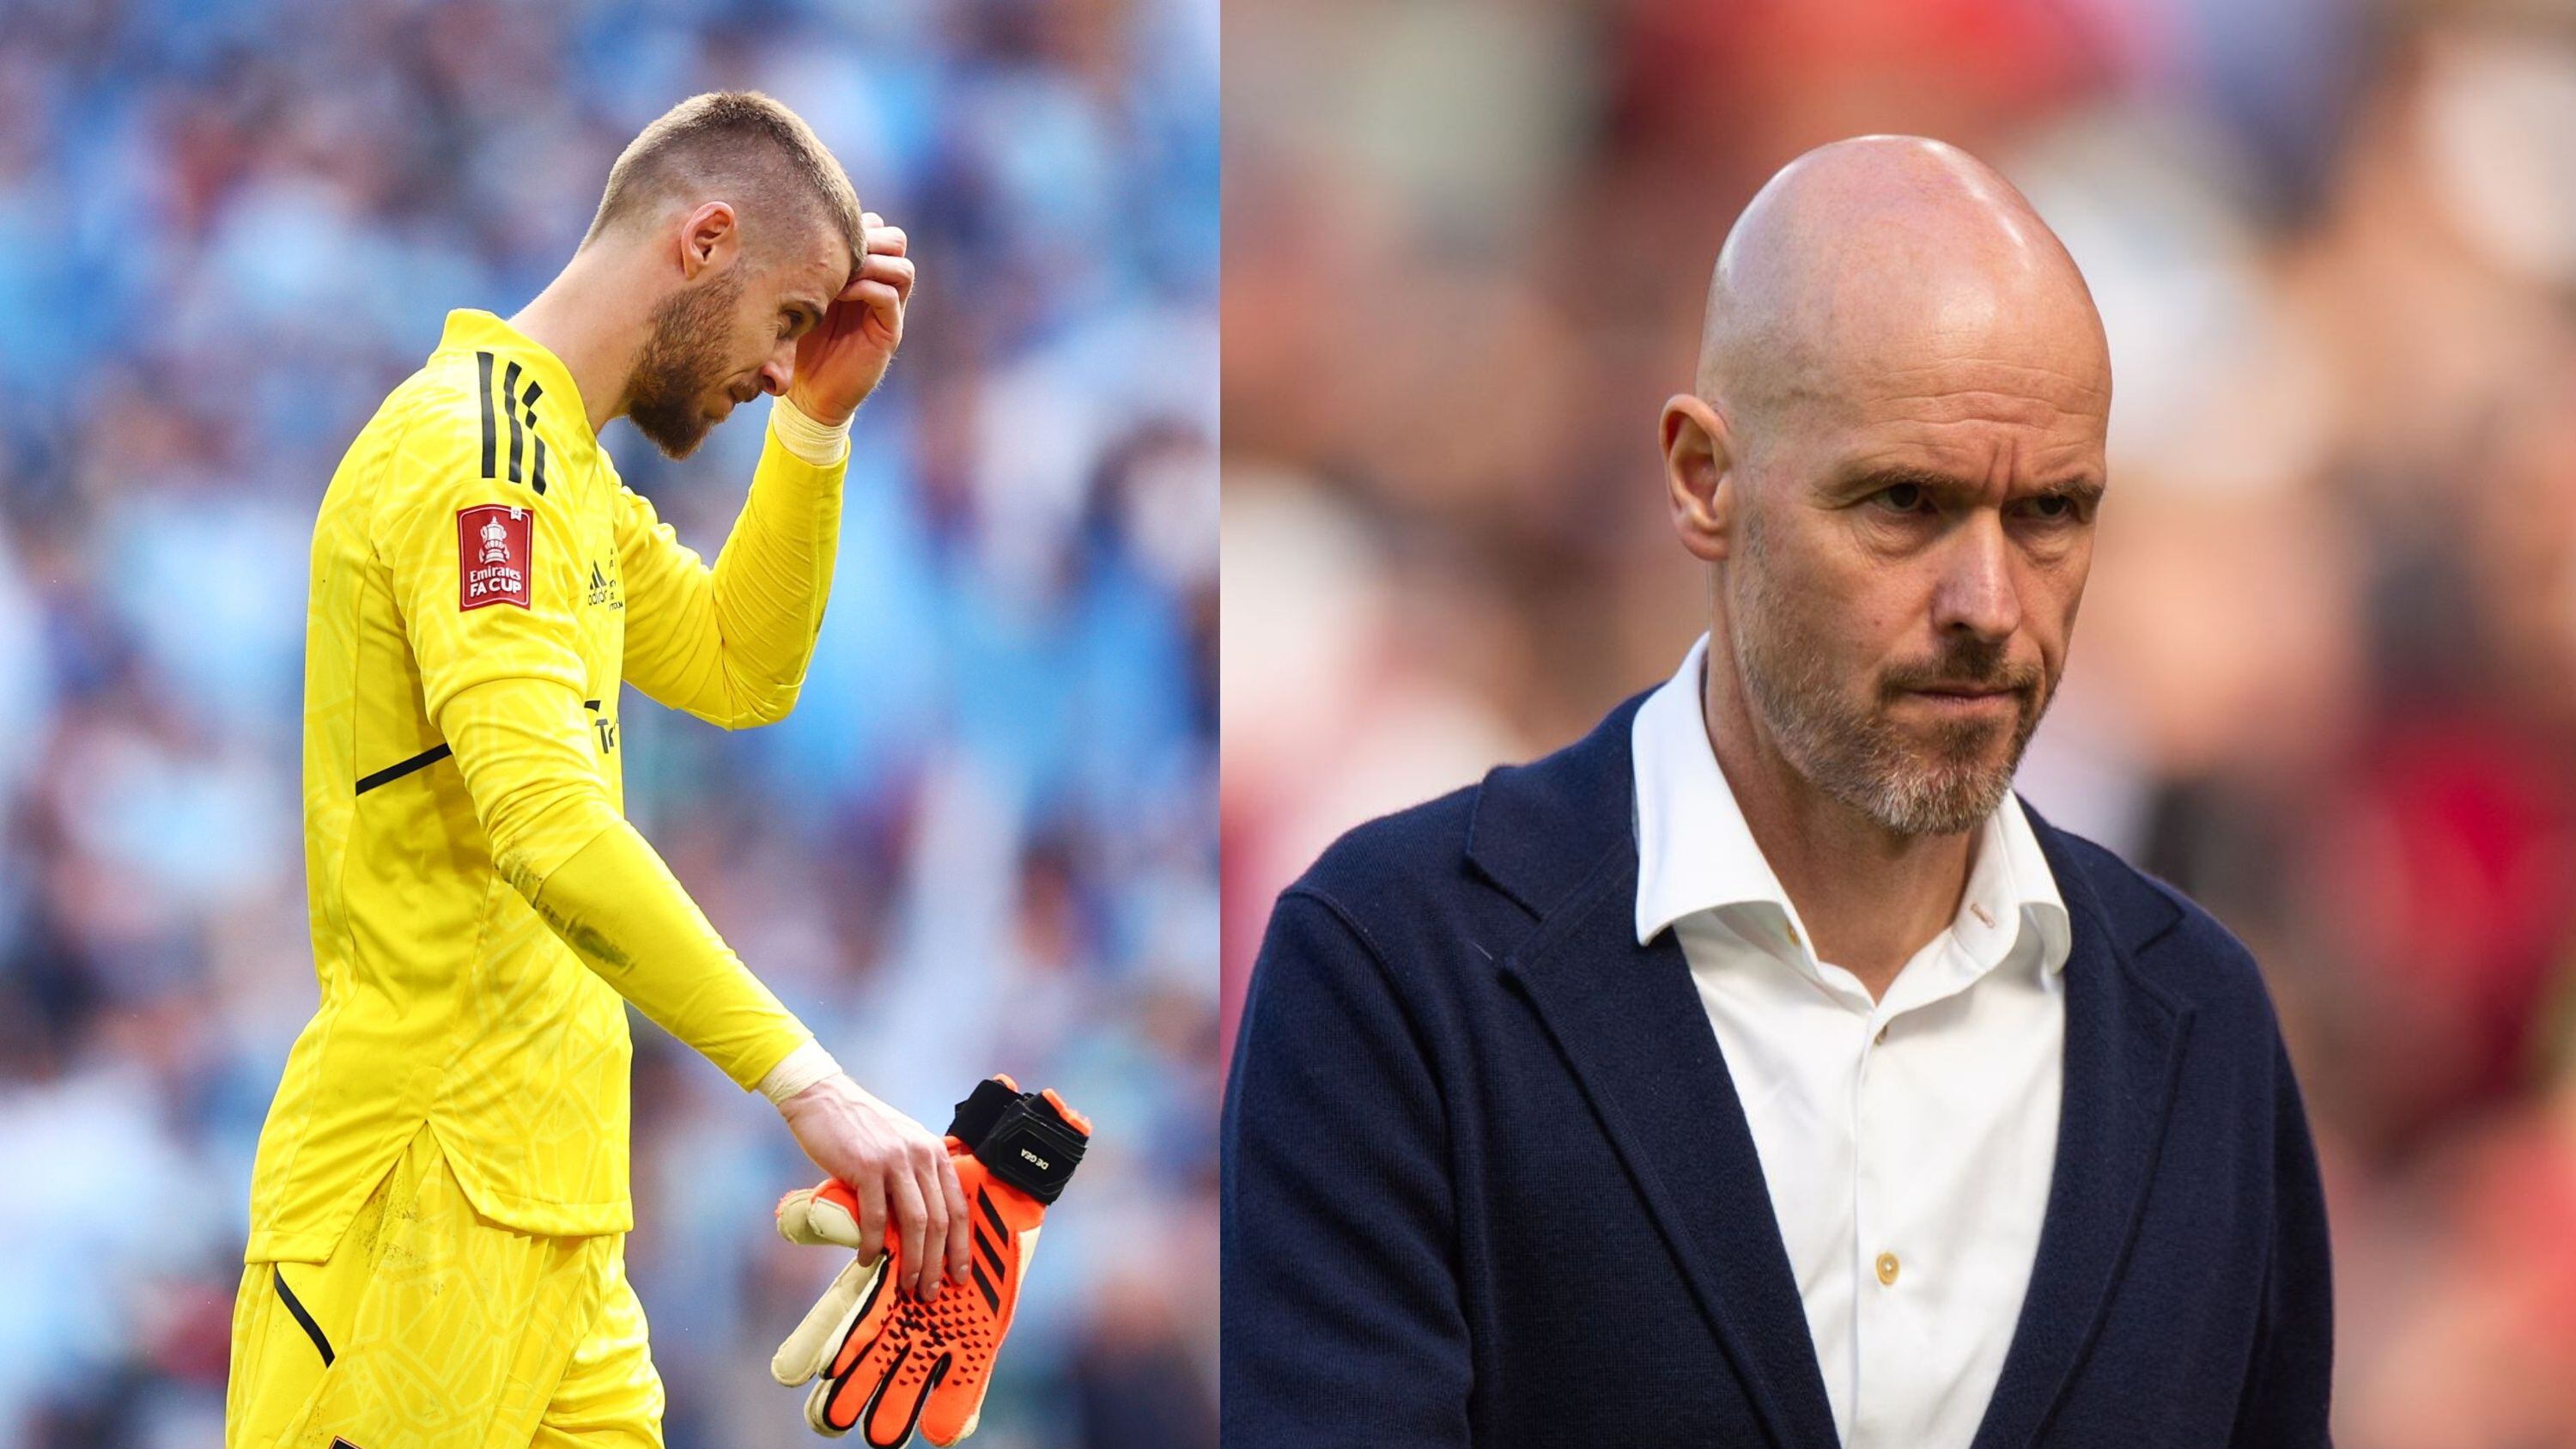 Not only David De Gea, the other player unexpectedly removed from the club by Erik Ten Hag